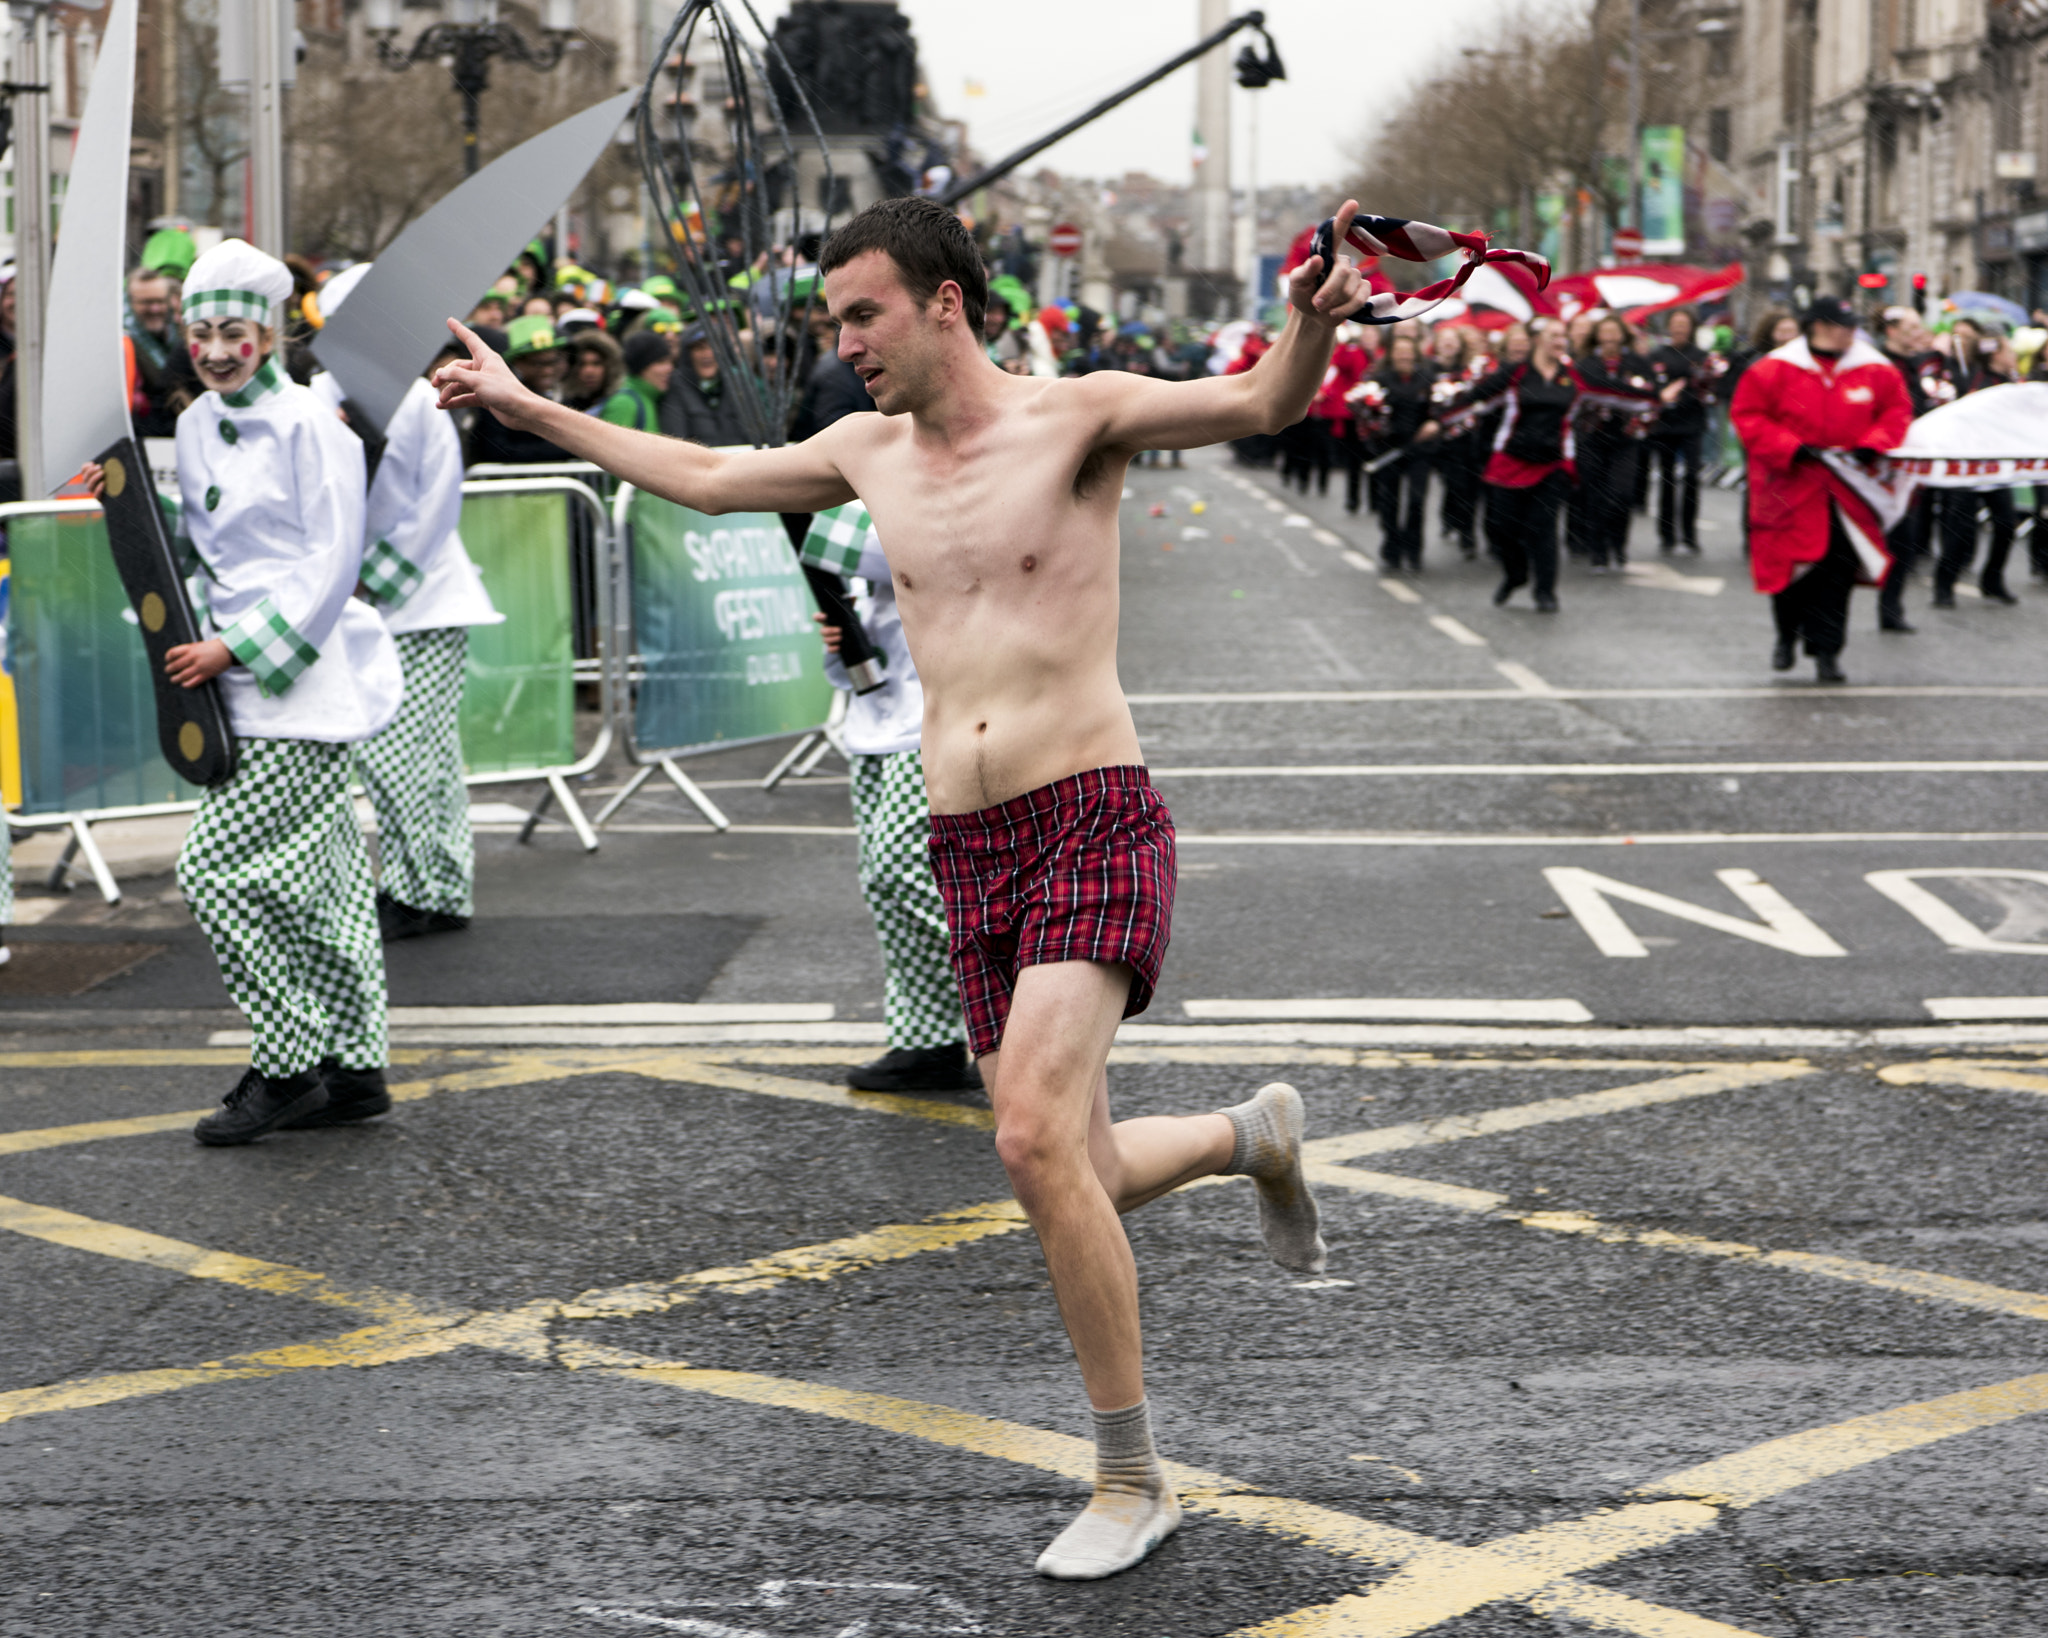 Nikon D810 sample photo. Even the streakers know it's a family event! photography